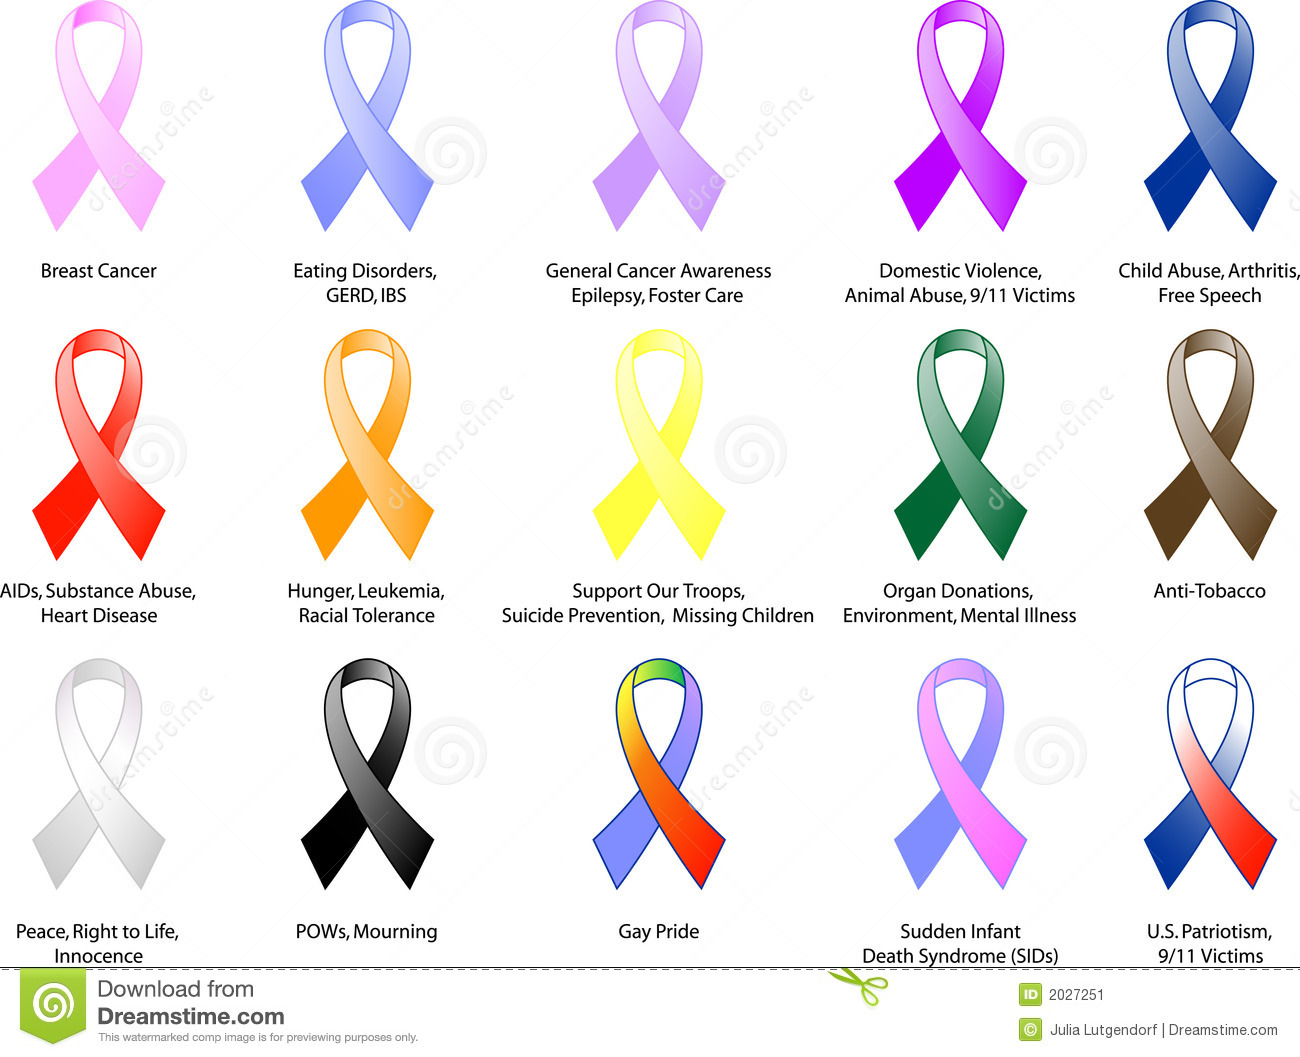 Colors And Meanings Cancer Ribbon For Liver Cancer Effy Moom Free Coloring Picture wallpaper give a chance to color on the wall without getting in trouble! Fill the walls of your home or office with stress-relieving [effymoom.blogspot.com]